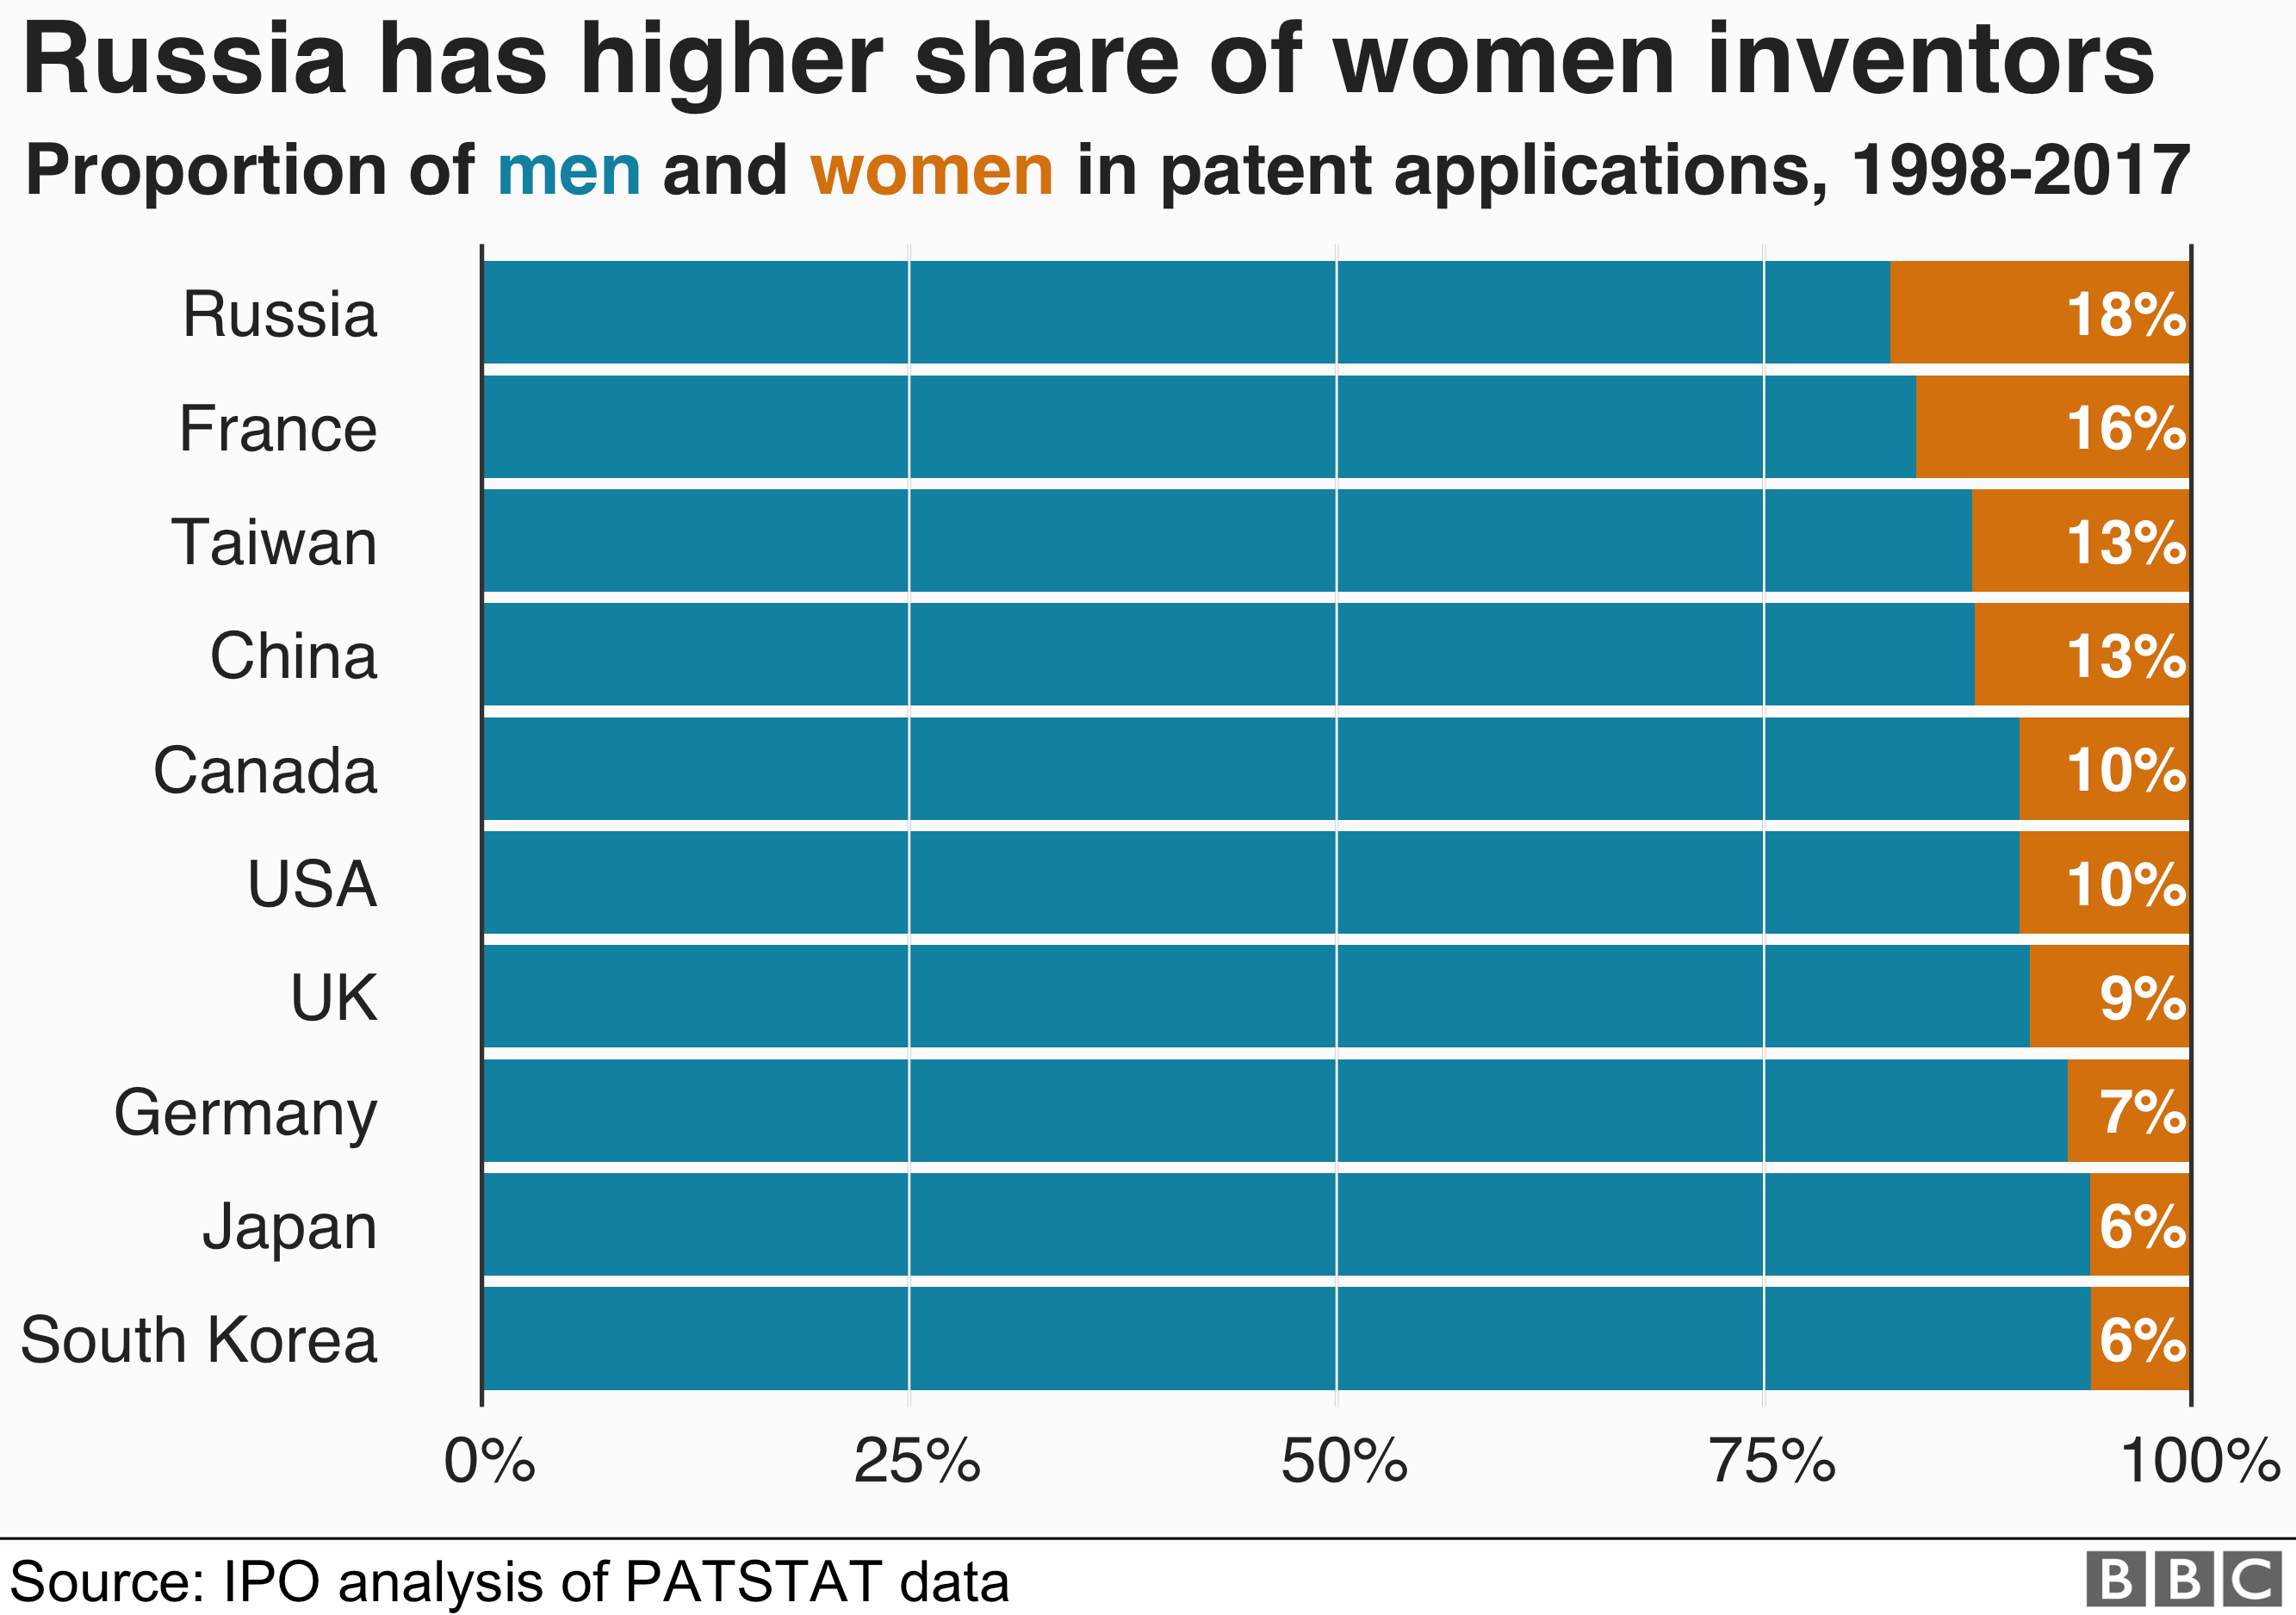 Chart showing that Russia has the highest proportion of female inventors